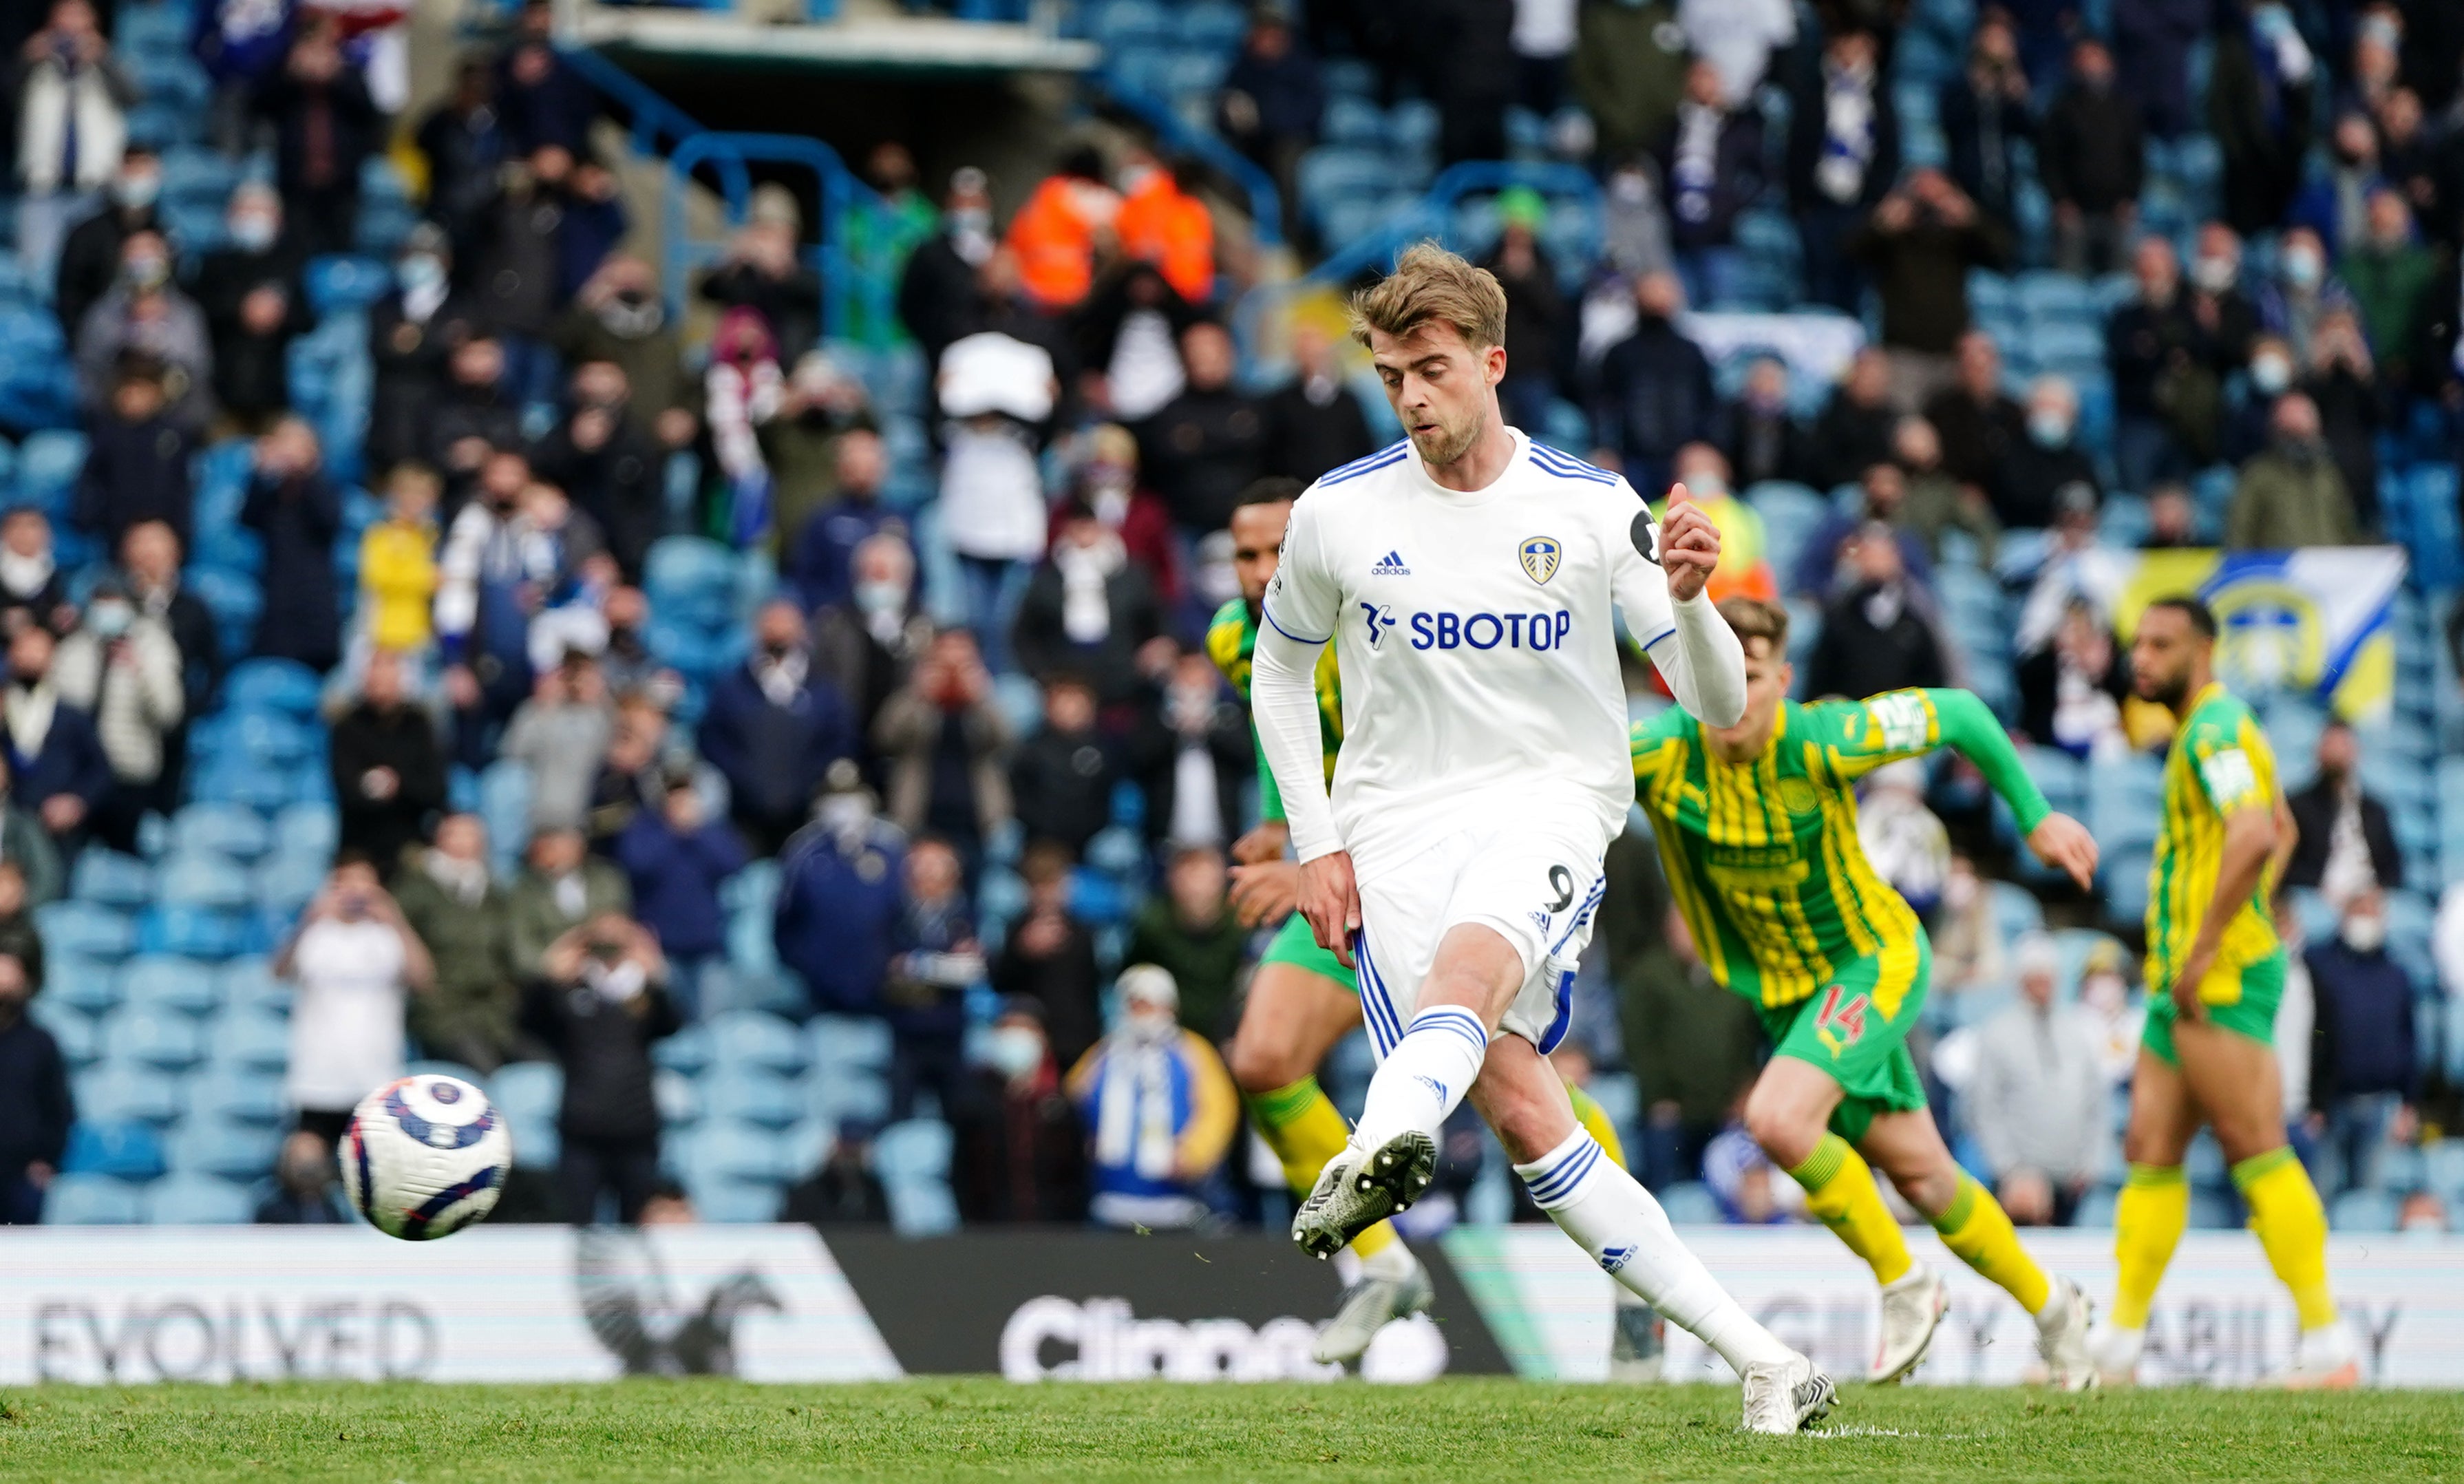 Patrick Bamford took his Premier League goals tally to 17 for the season with his penalty against West Brom